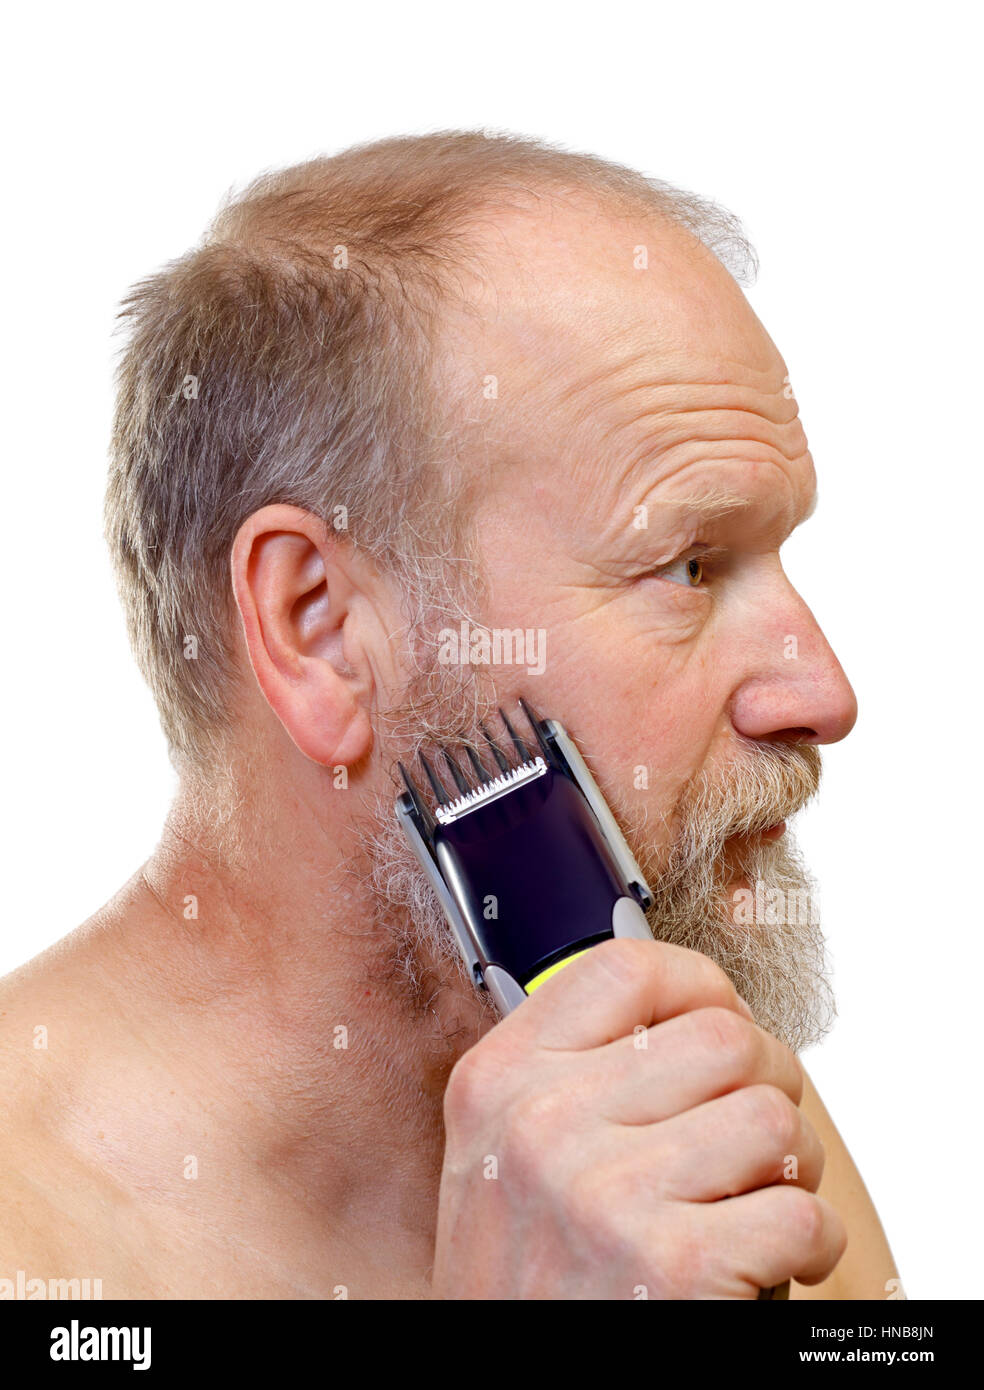 Portrait Of A Man Cutting His Own Hair Stock Photo Royalty Free